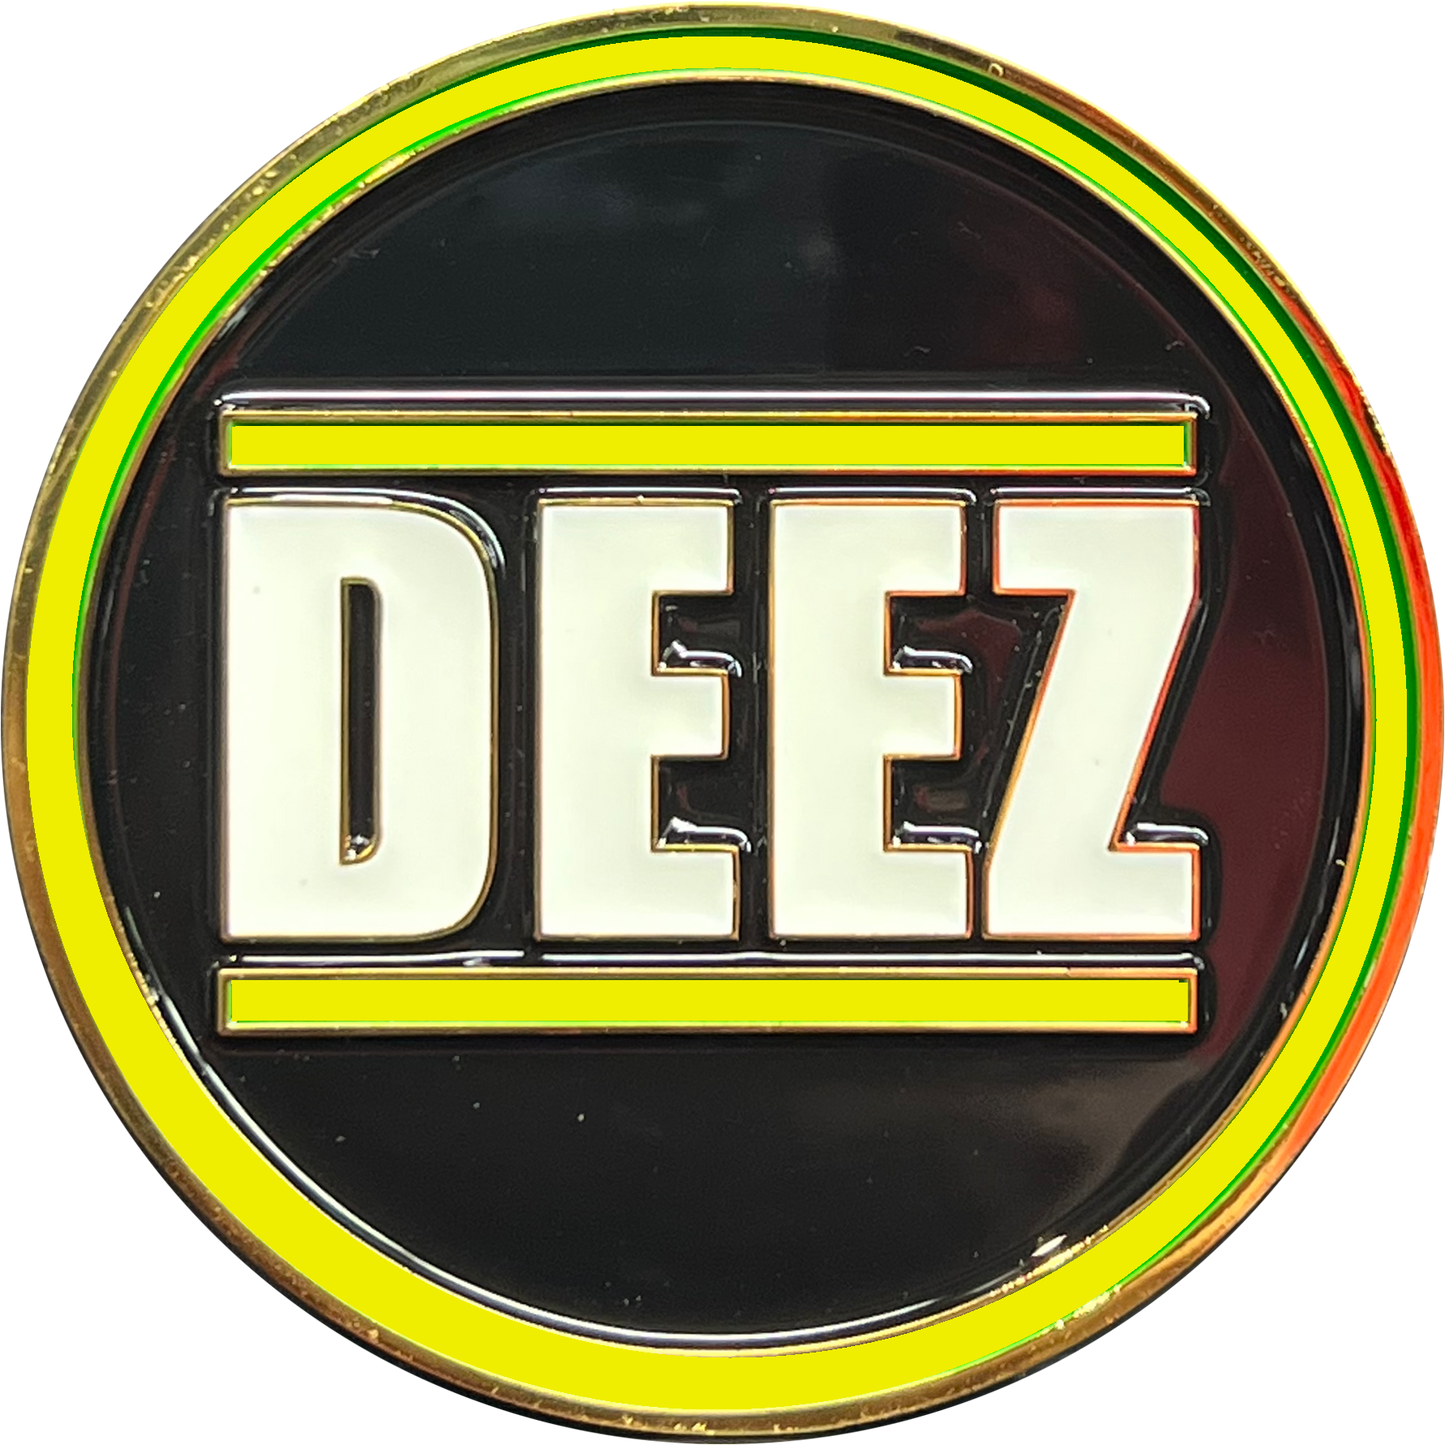 GL2-003 Deez Nuts challenge coin with 3D nuts Dispatcher Funny Gag Gift Thin Gold Line yellow